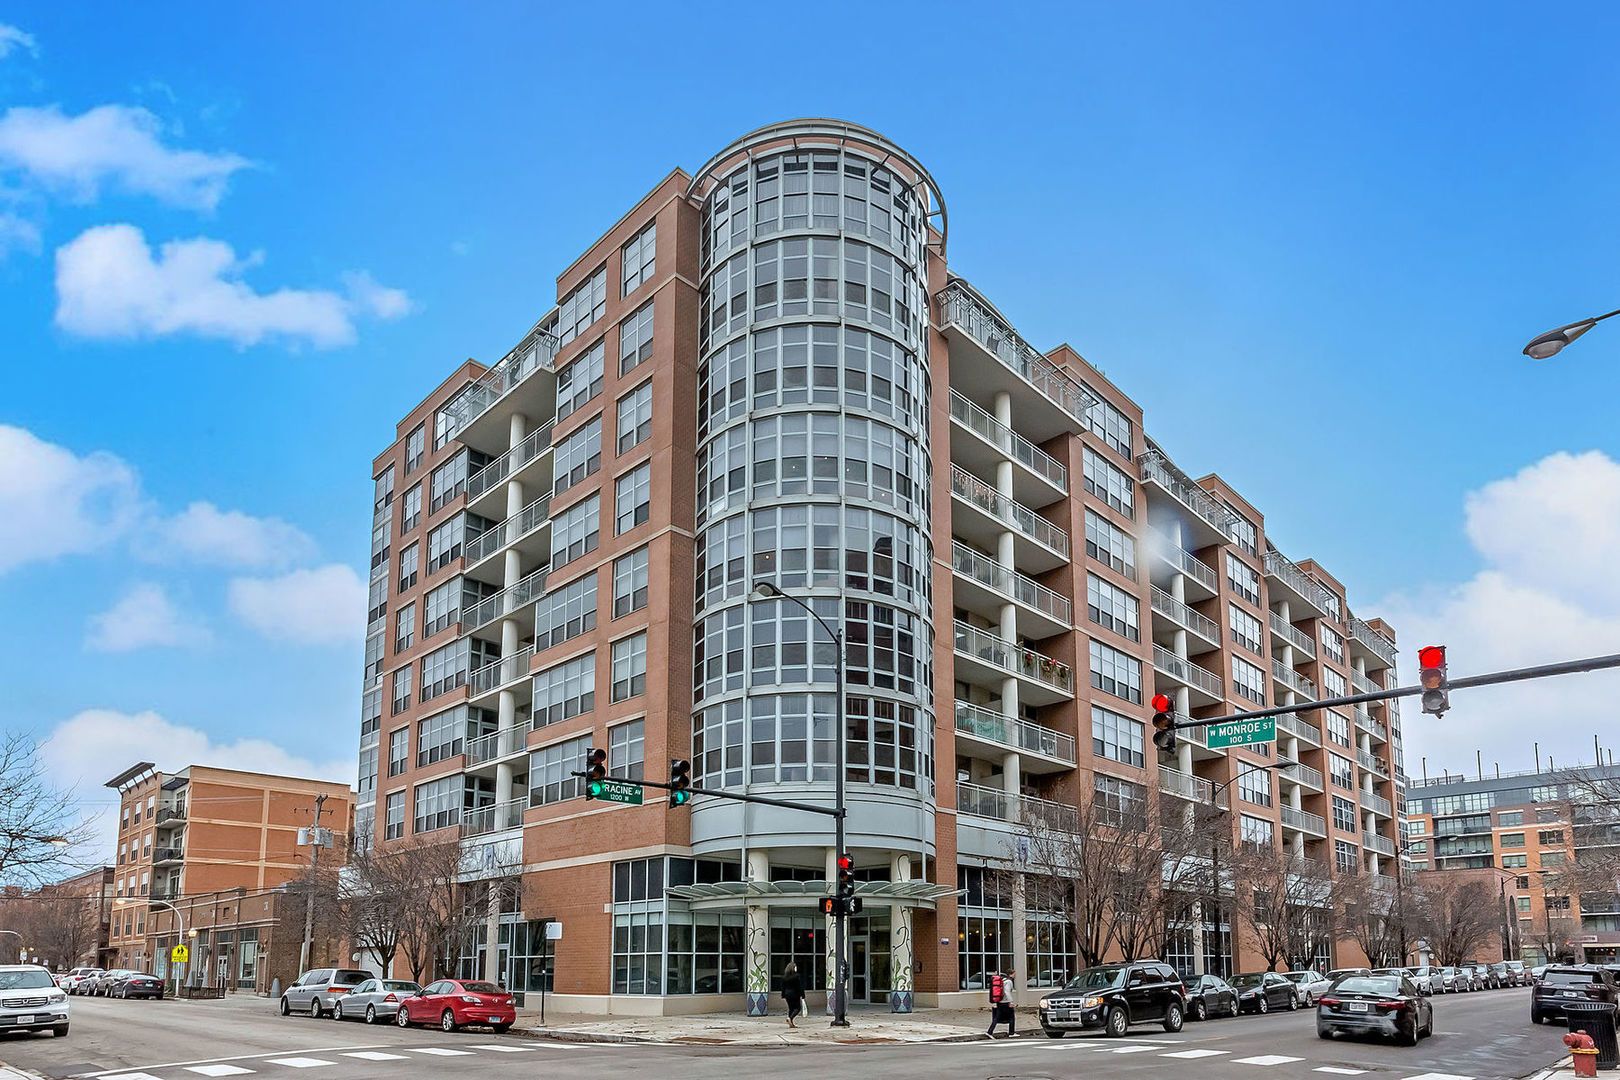 Main Photo: 1200 W Monroe Street Unit 318 in Chicago: CHI - Near West Side Residential Lease for sale ()  : MLS®# 11610824